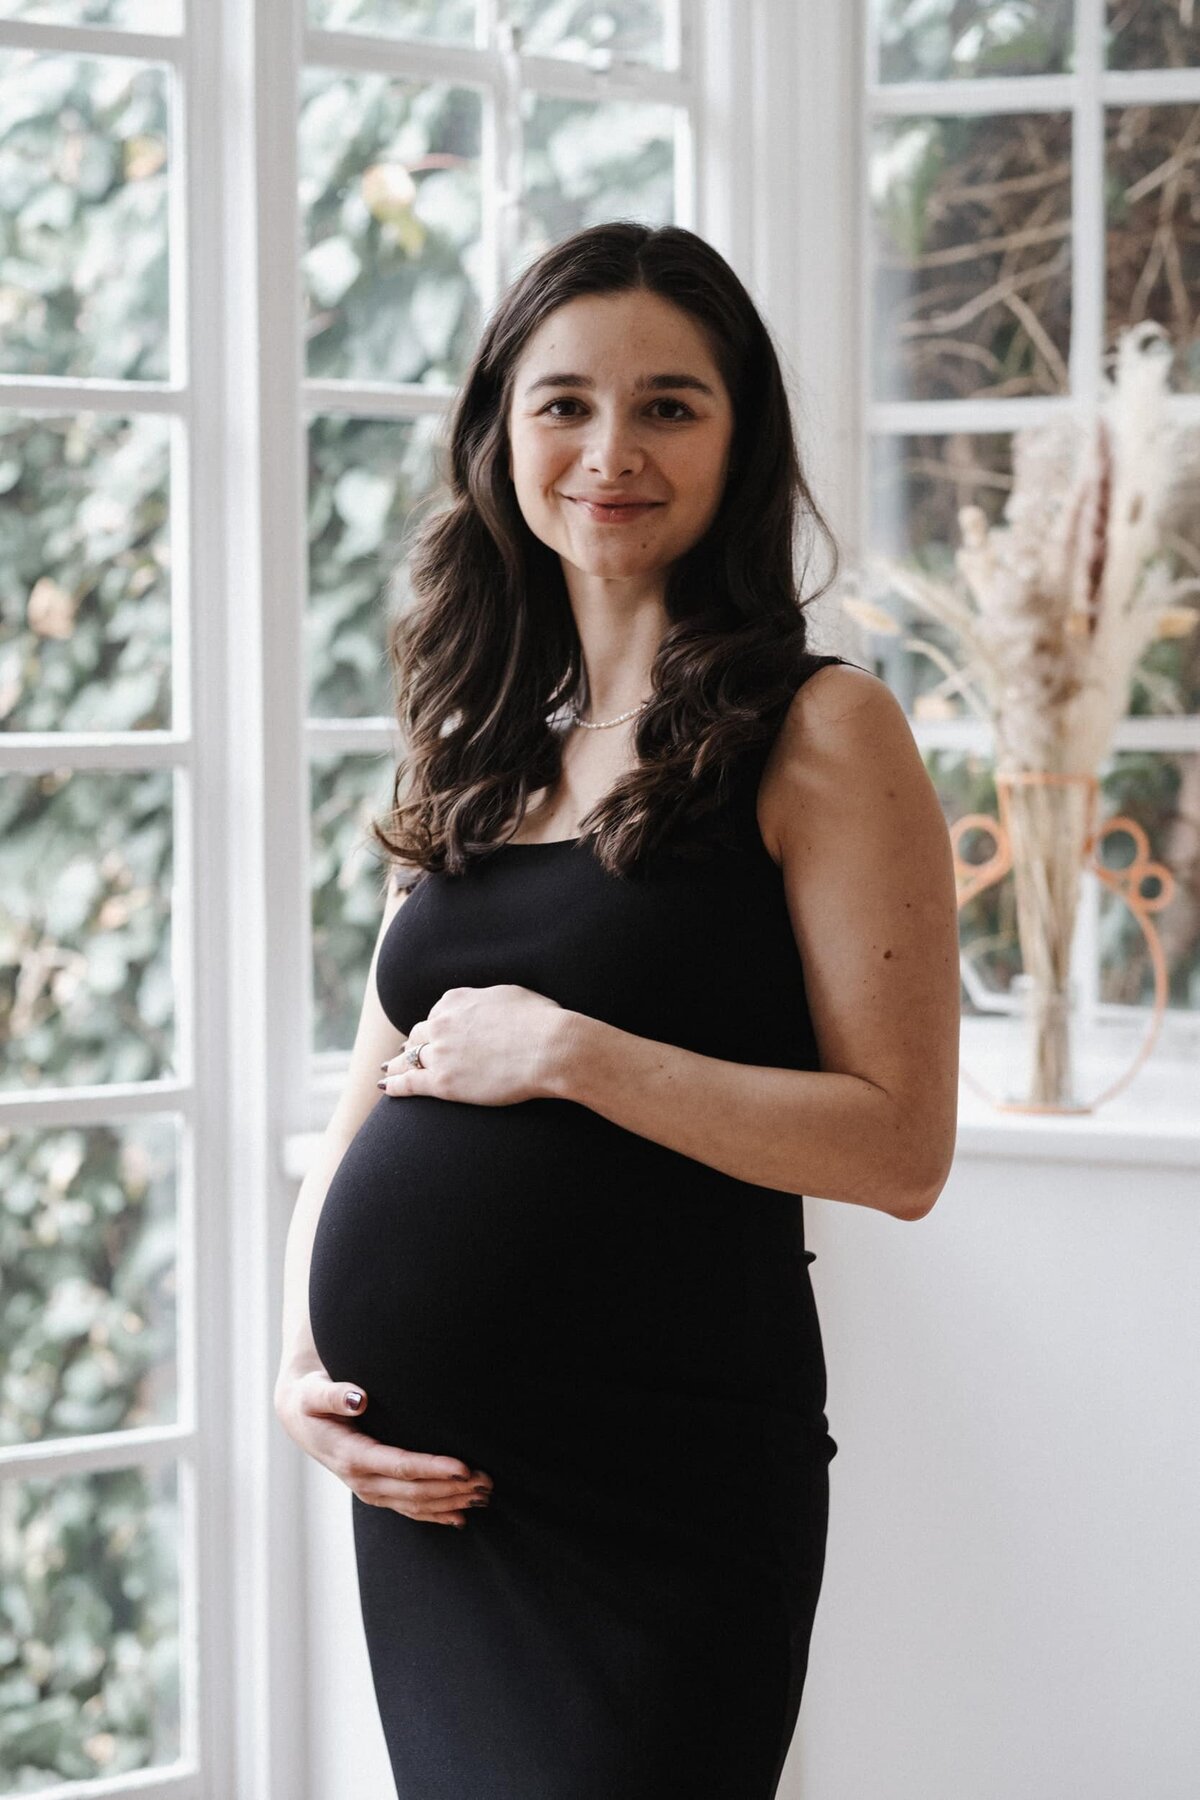 Long haired pregnant woman stands in living room and smiles